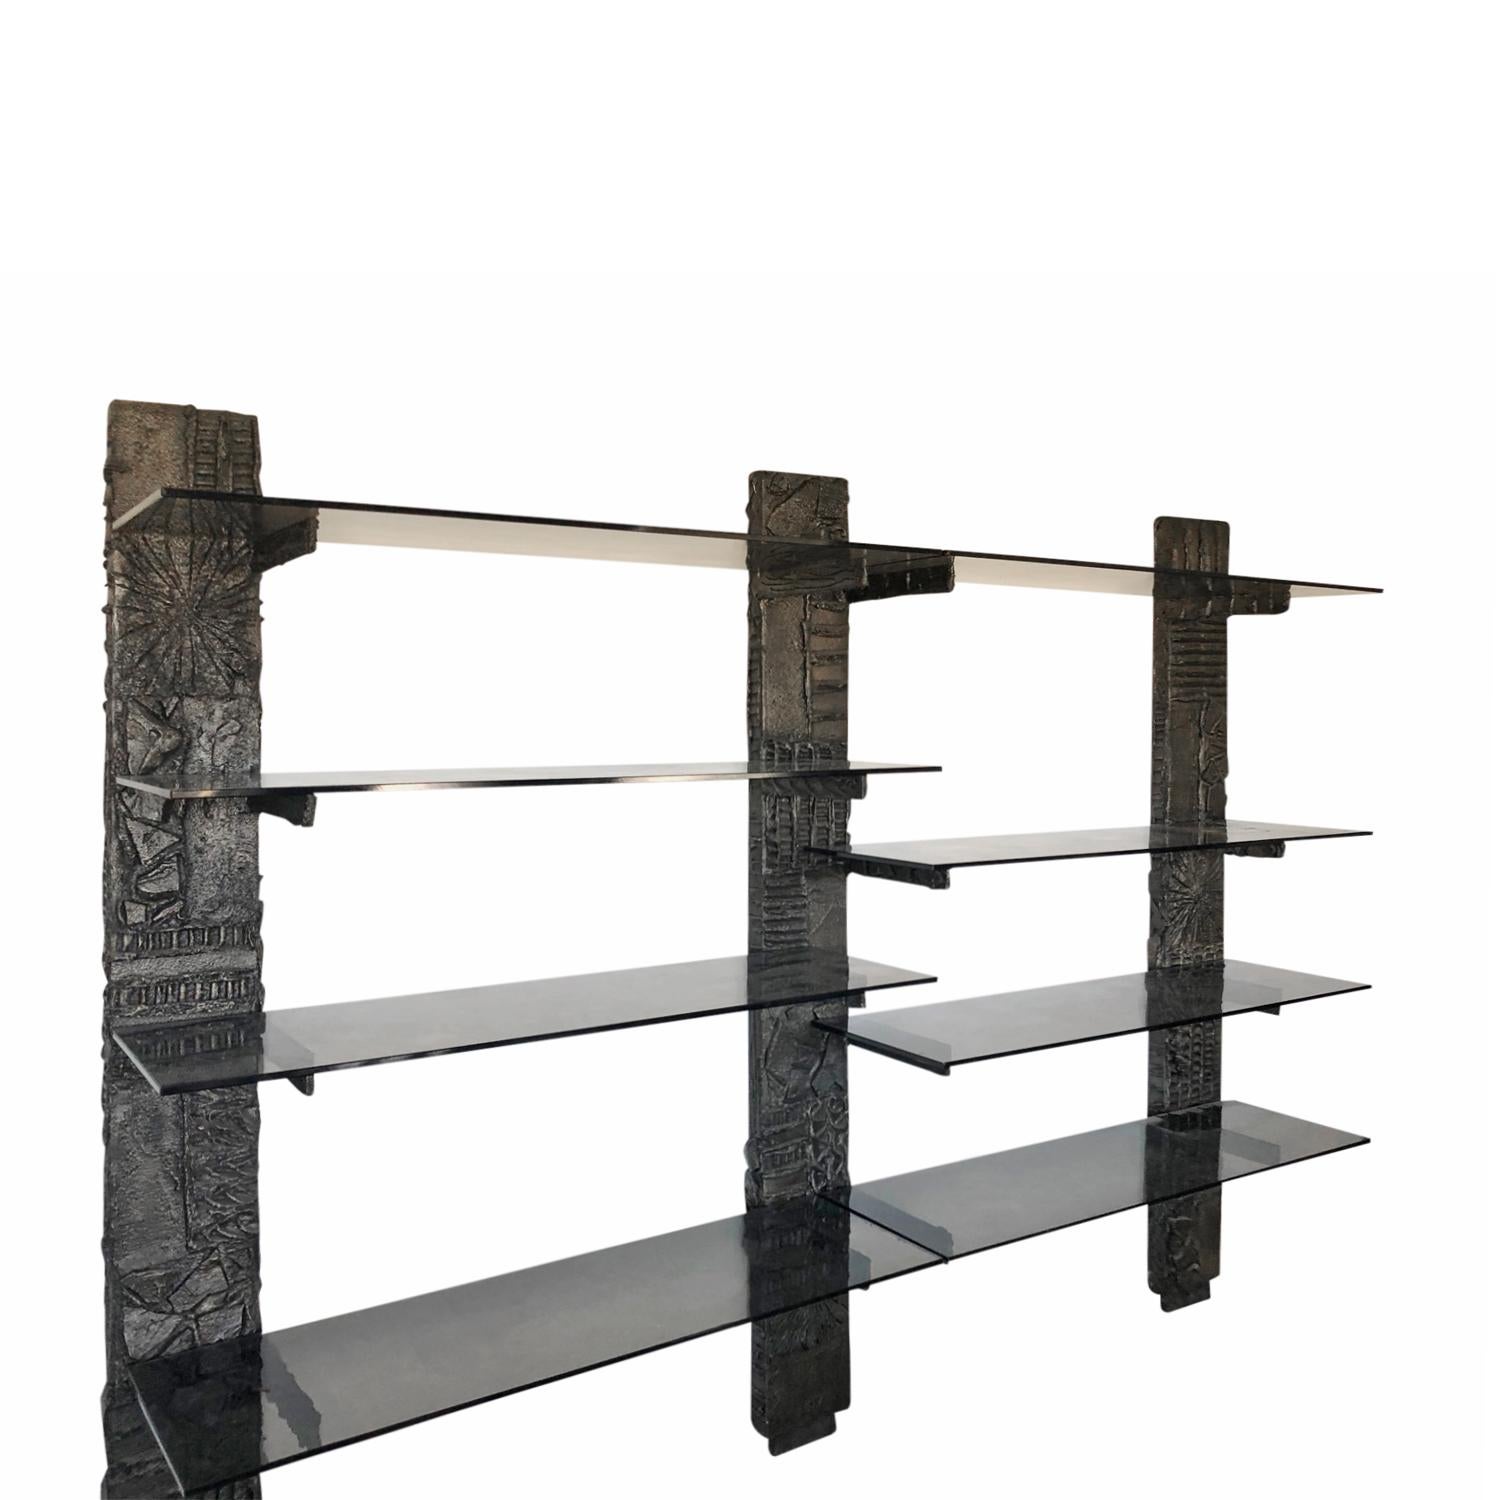 Wall unit in sculpted bronze resin with smoked glass shelves by Paul Evans, American, 1967 (signed 